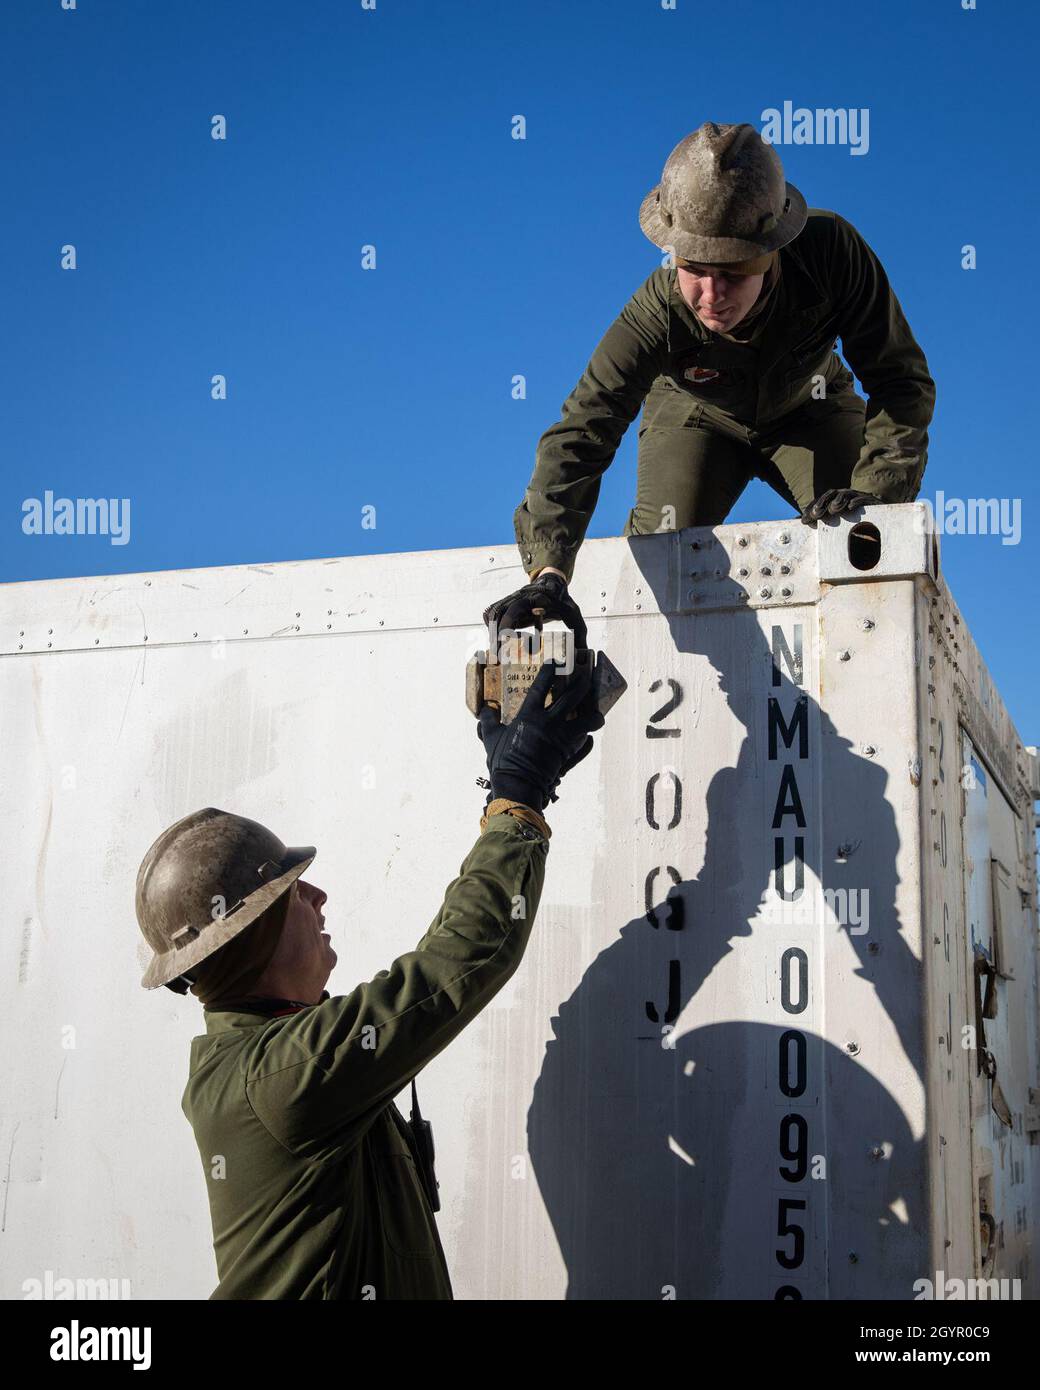 Marine Cpl. Matthew Swanson, top, hands a container twist lock to Staff Sgt. Steven Beall in support of exercise Carolina Patriot 2020 in Philadelphia, Pennsylvania, Jan. 22, 2020. The exercise ensures 2nd Marine Aircraft Wing’s proficiency and readiness in aviation logistics support operations. Swanson is an aviation ordnance systems technician with Marine Aviation Logistics Squadron (MALS) 26. Beall is an aviation precision measurement equipment calibration/repair technician with MALS-14. (U.S. Marine Corps photo by Cpl. Cody Rowe) Stock Photo